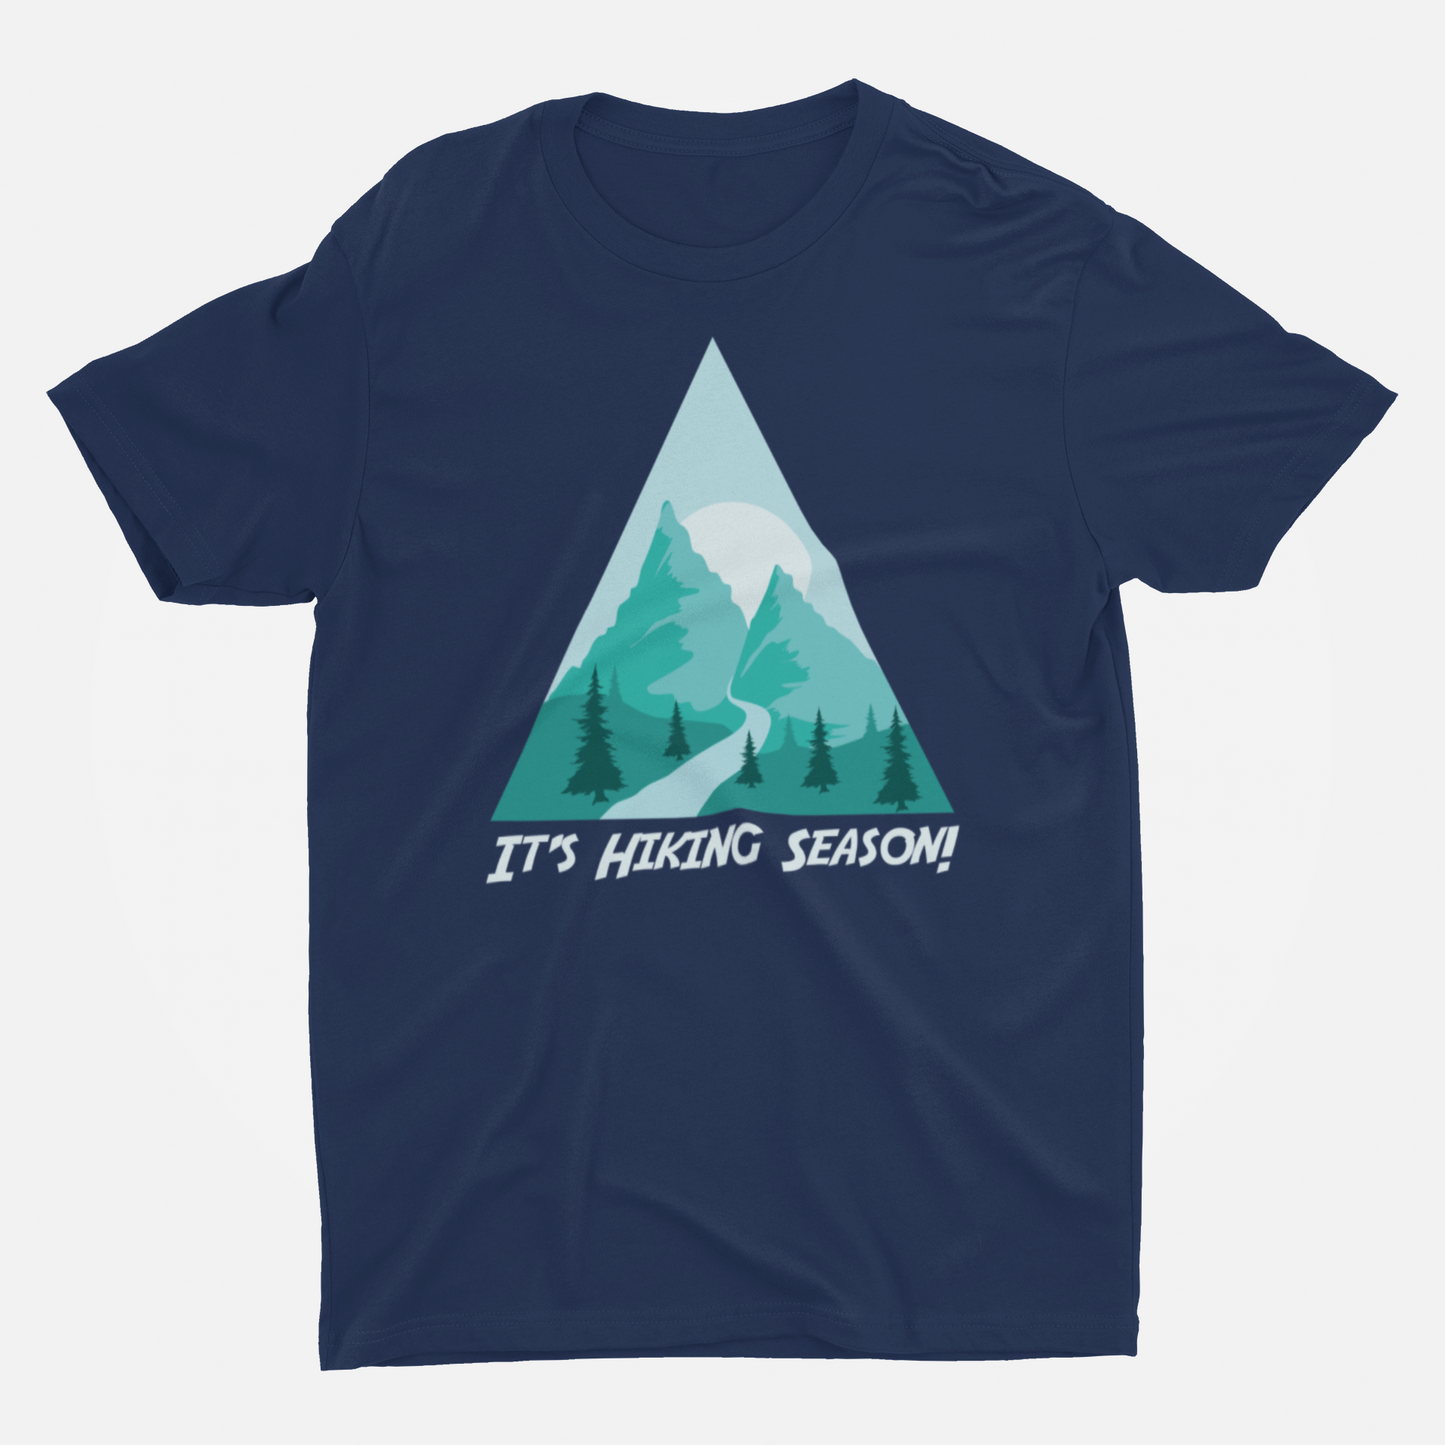 Its A Hiking Season Navy Blue Round Neck T-Shirt for Men